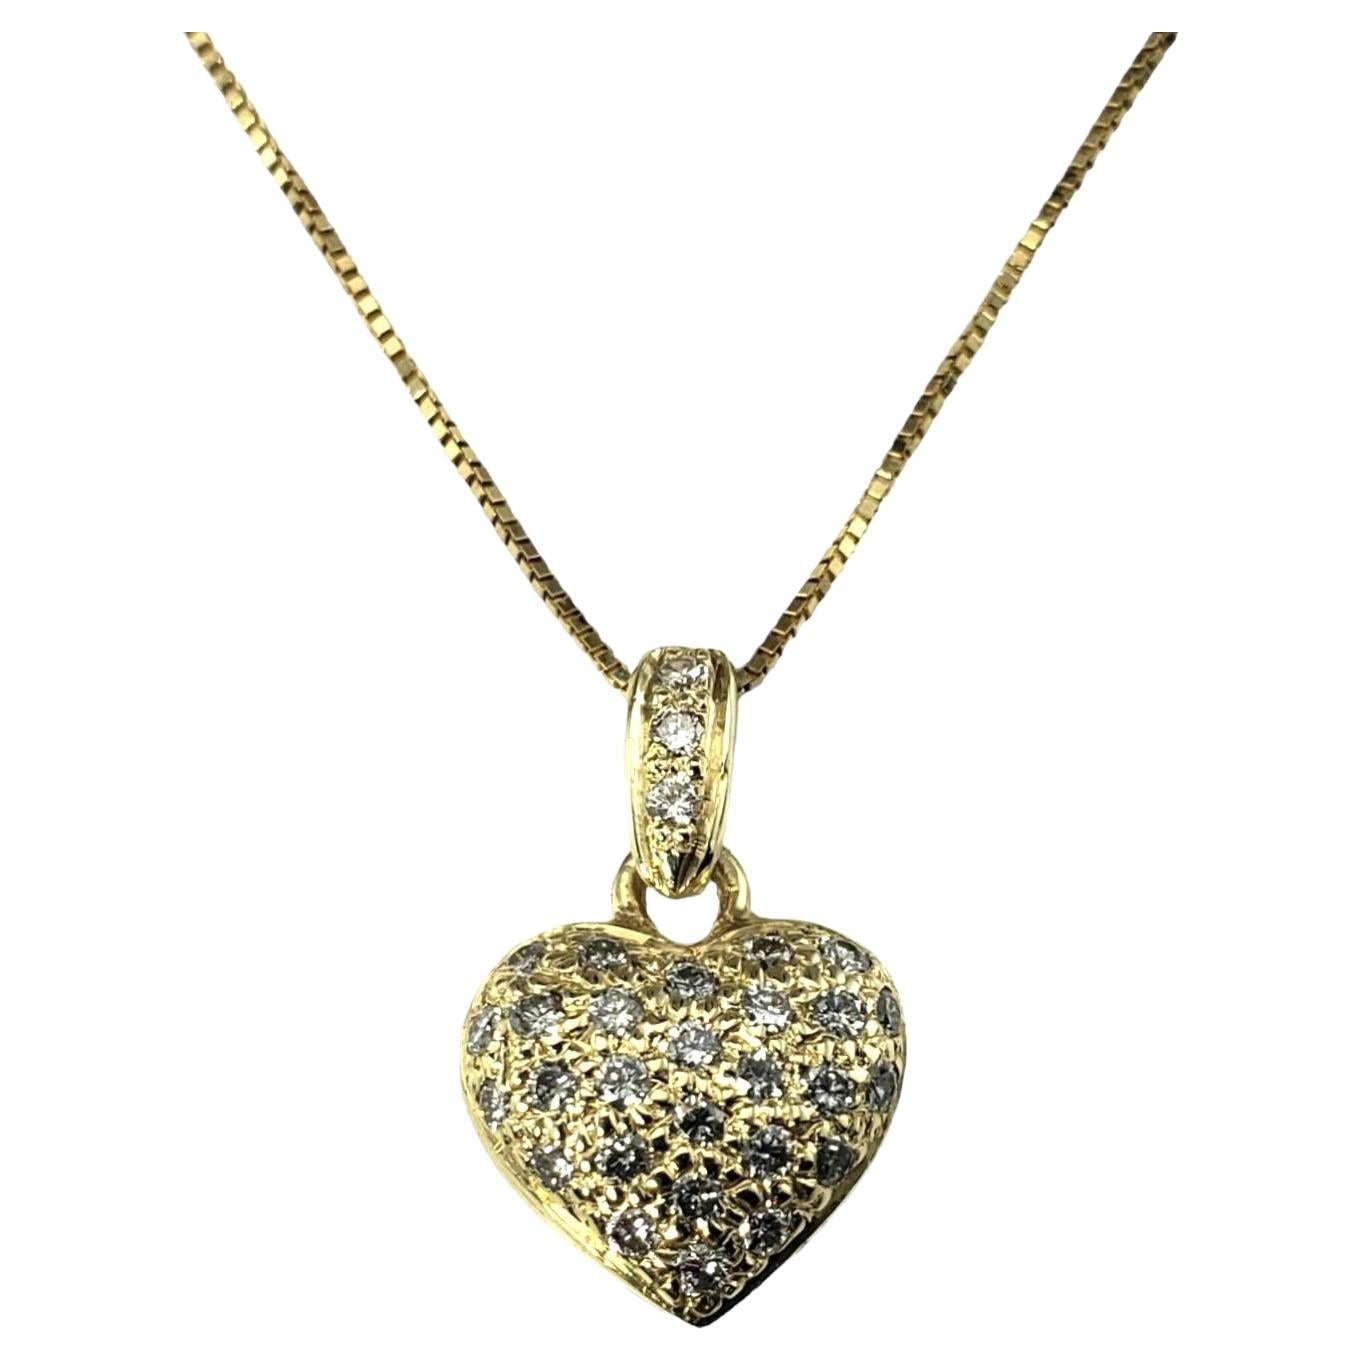 Vintage 14 Karat Yellow Gold and Diamond Heart Pendant Necklace #15300 For Sale